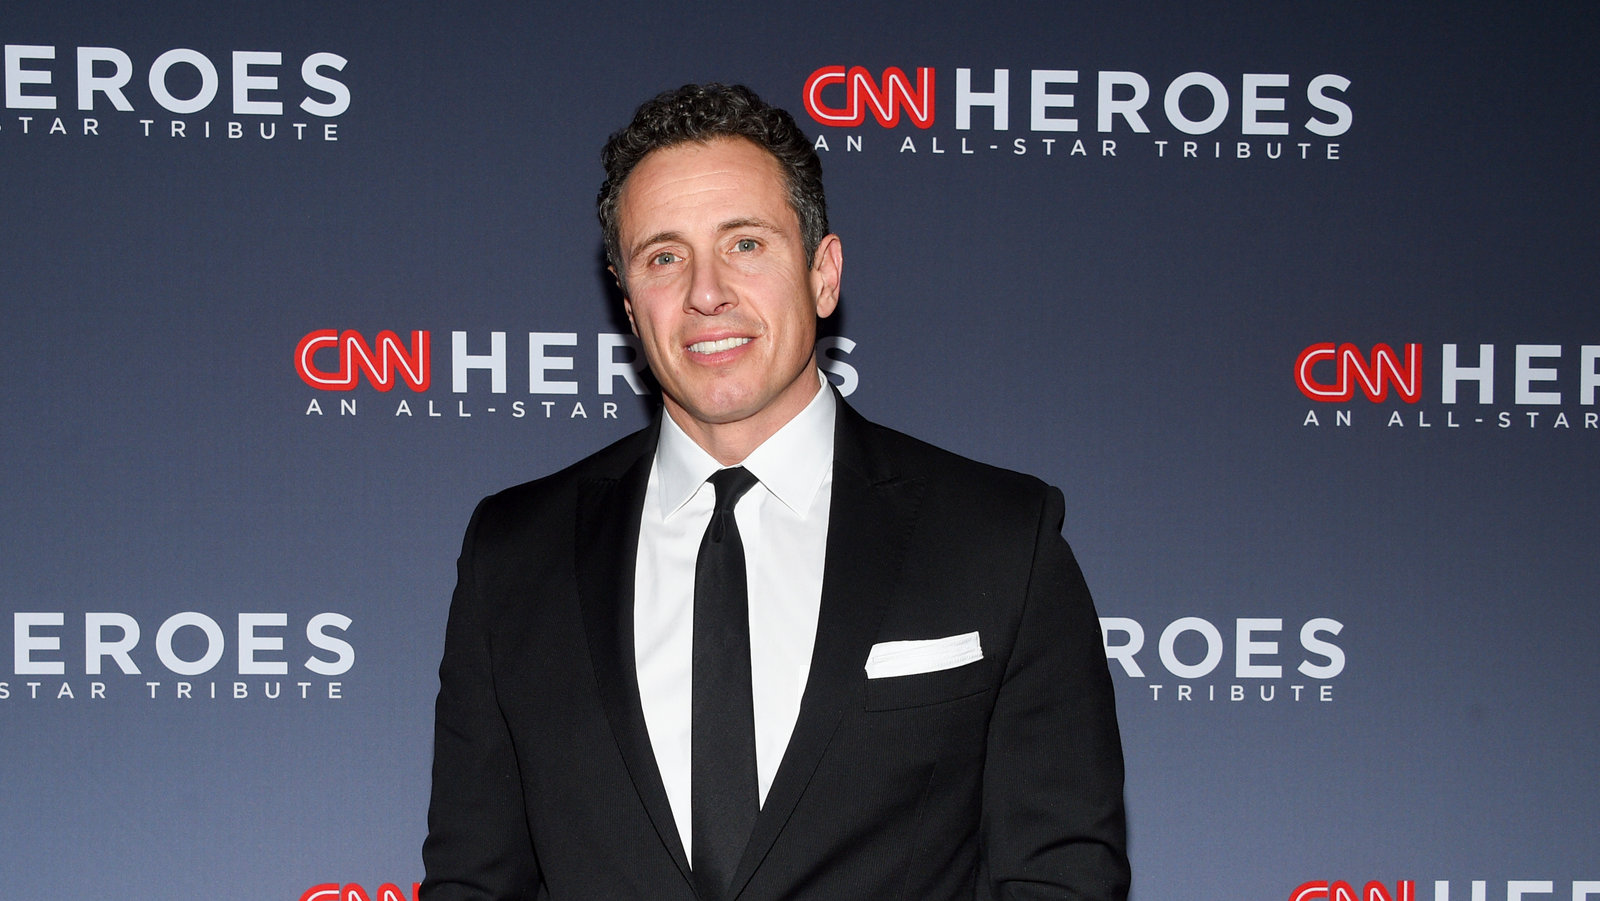 Chris Cuomo is a CNN anchor and the brother of Gov. Andrew M. Cuomo